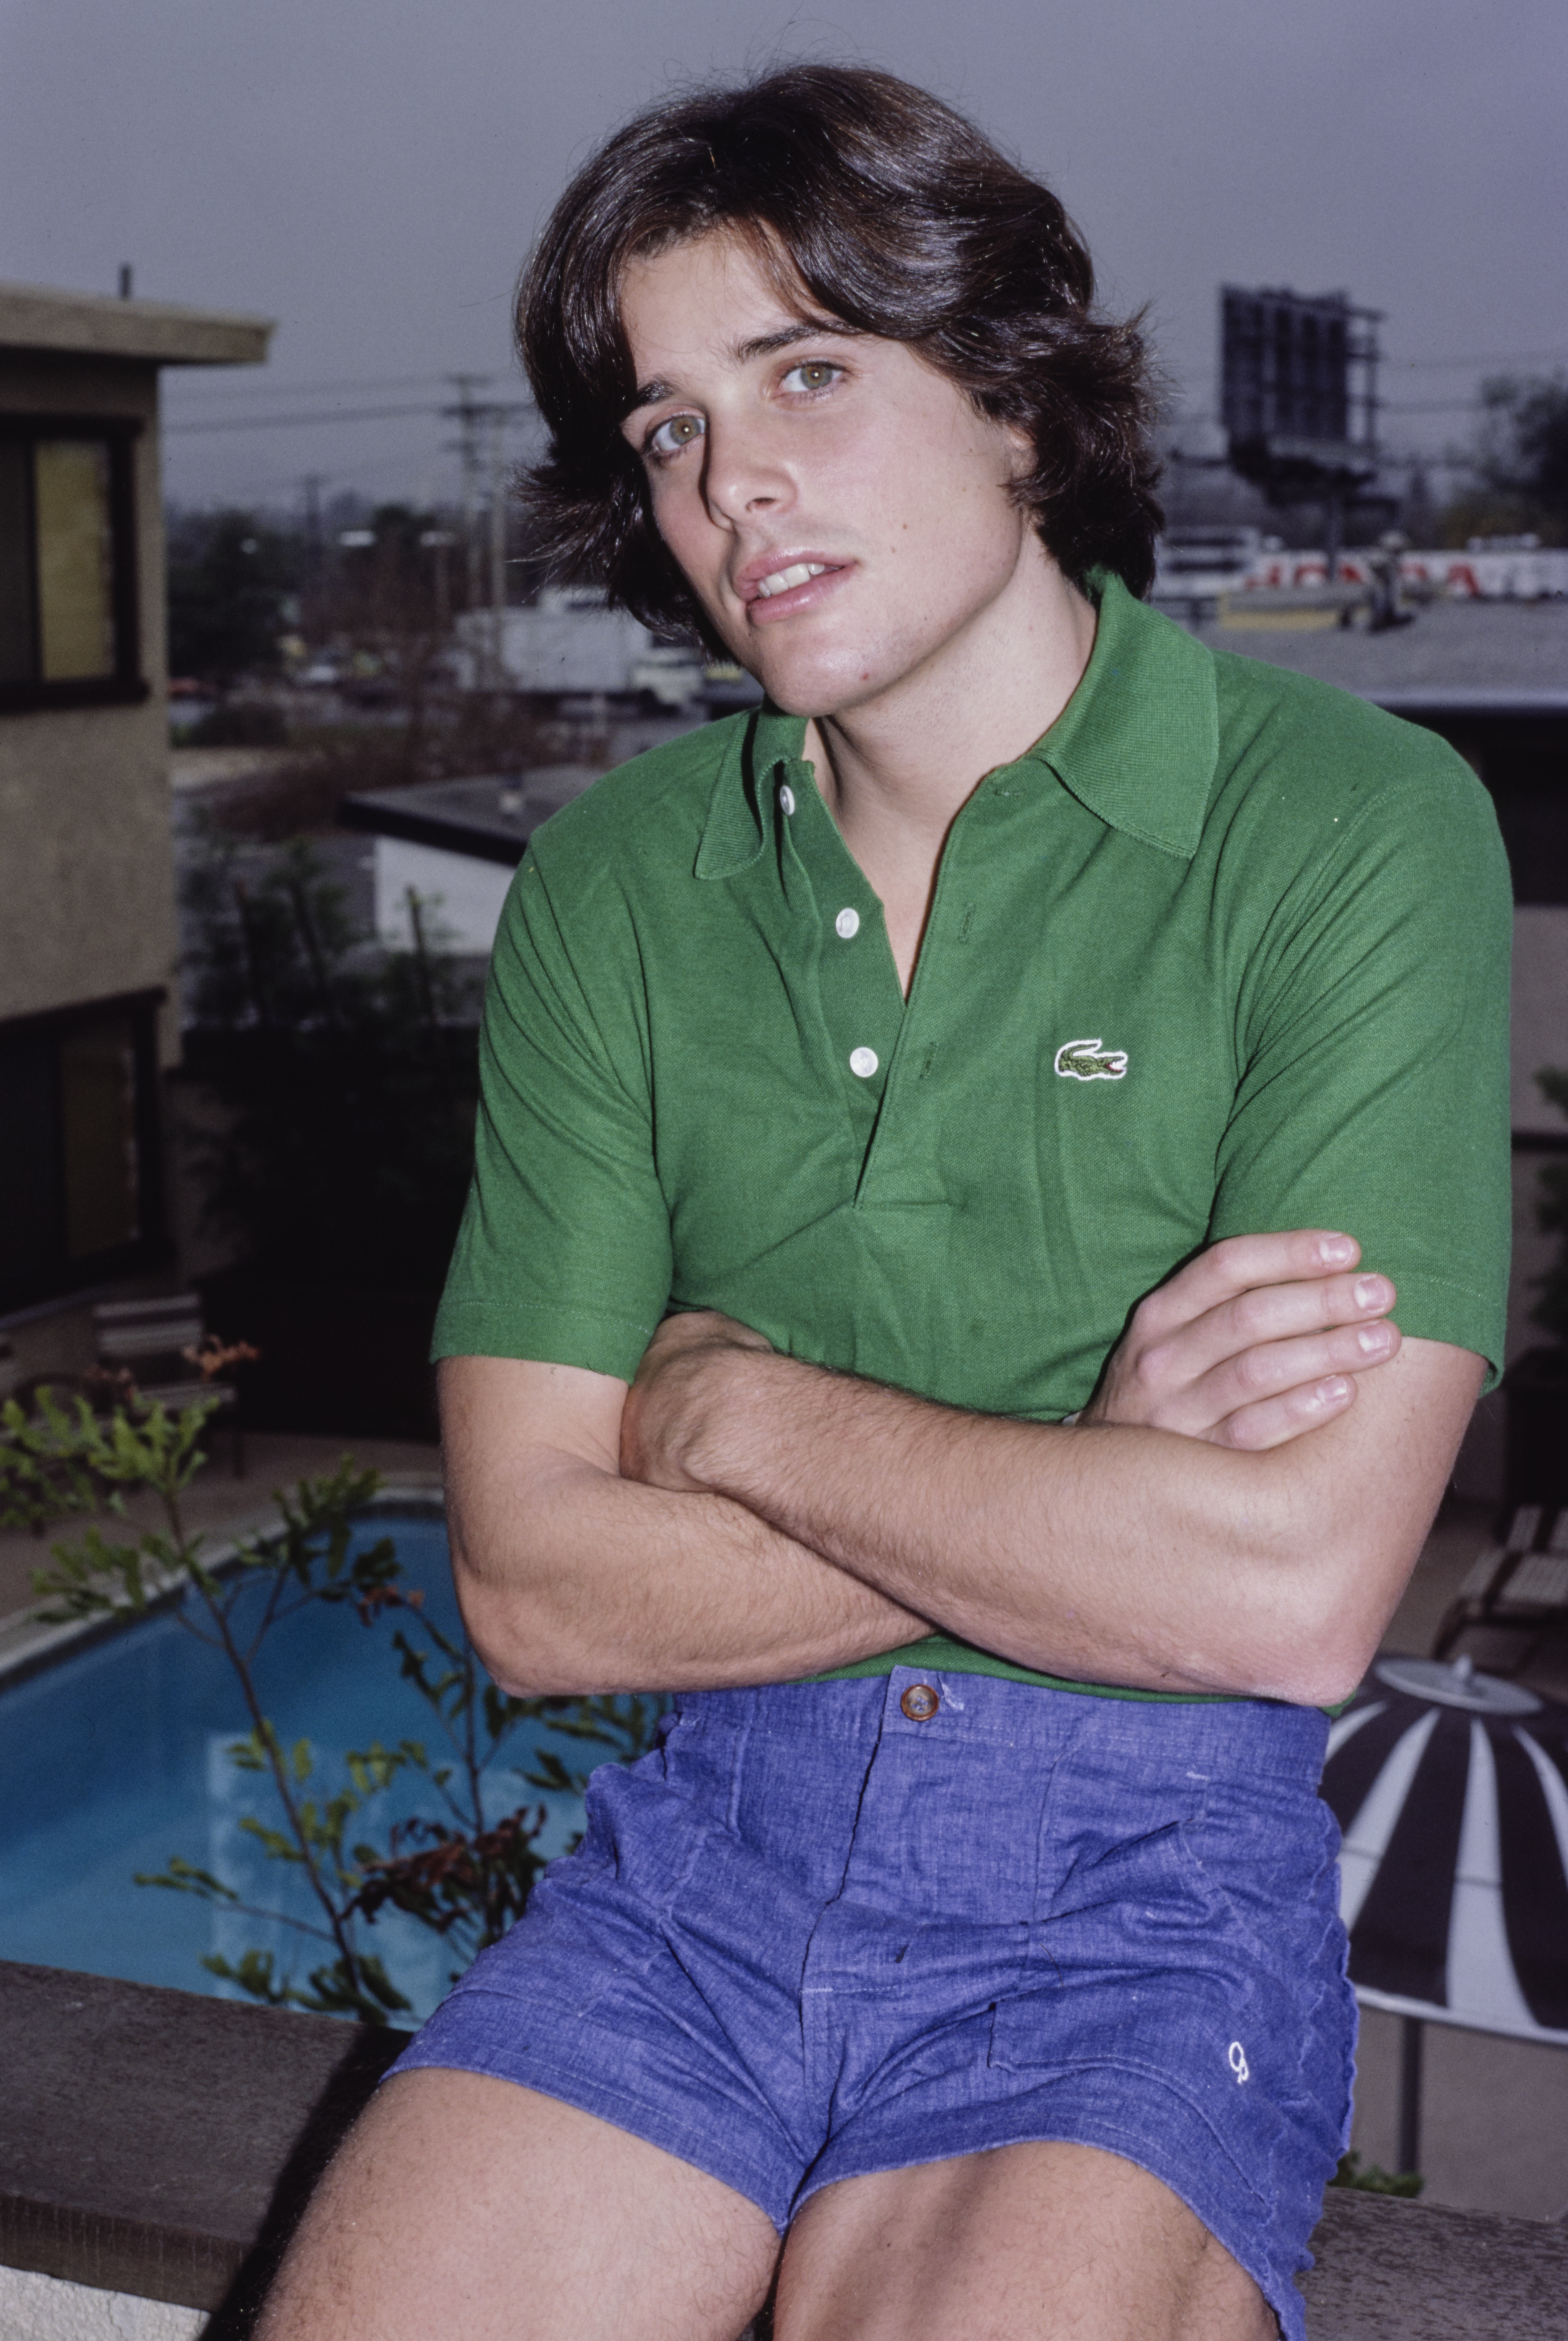 American actor Peter Barton sits, his arms crossed, wearing a green Lacoste polo shirt and blue shorts, a swimming pool below the ledge on which he sits, location unspecified, circa 1980. (Photo by Vinnie Zuffante/Michael Ochs Archives/Getty Images)